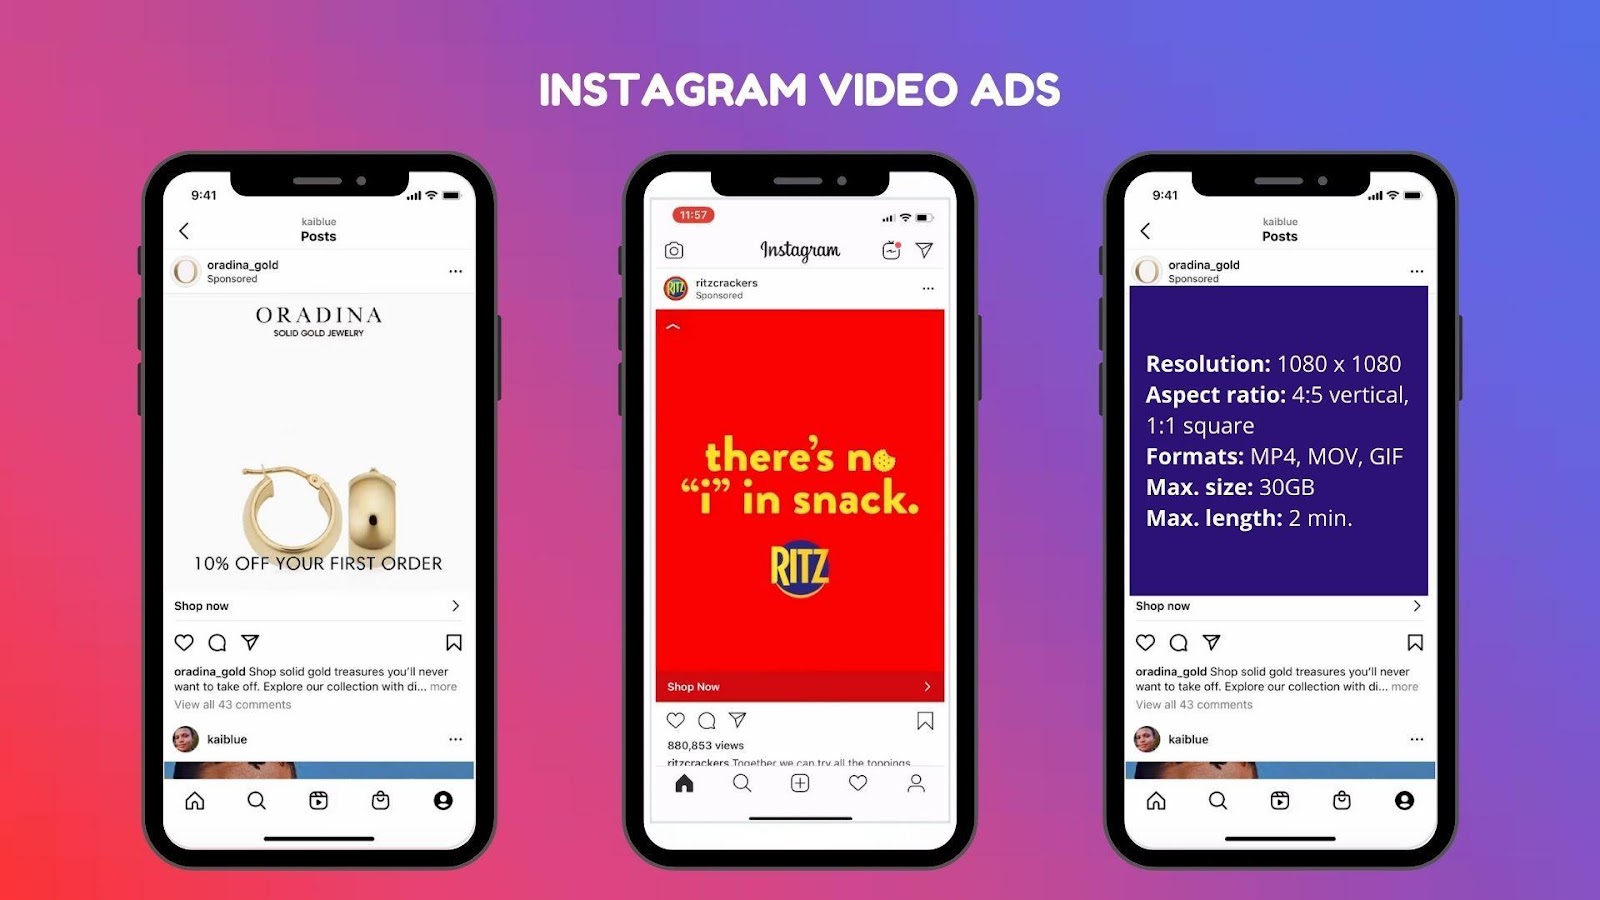 Instagram video ad examples and specs